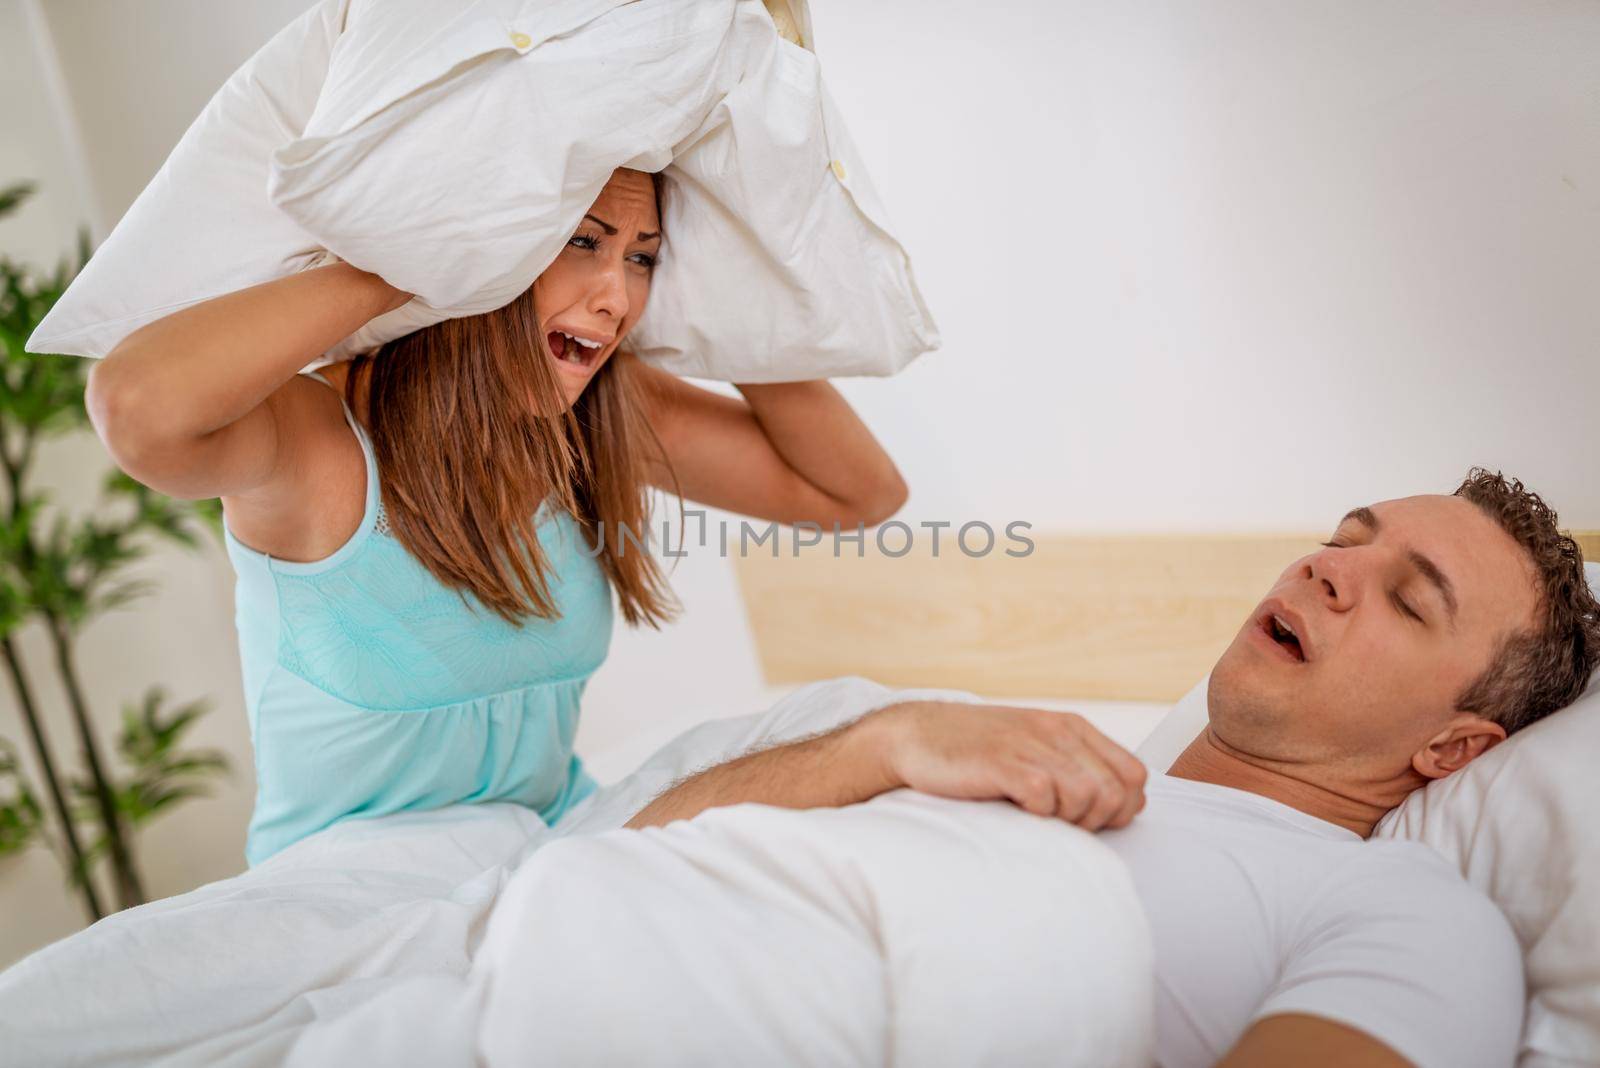 Heterosexual couple in bed, man sleeps and snoring with mouth open, while a tired woman irritated by snoring sitting on bed with a pillow on her head.